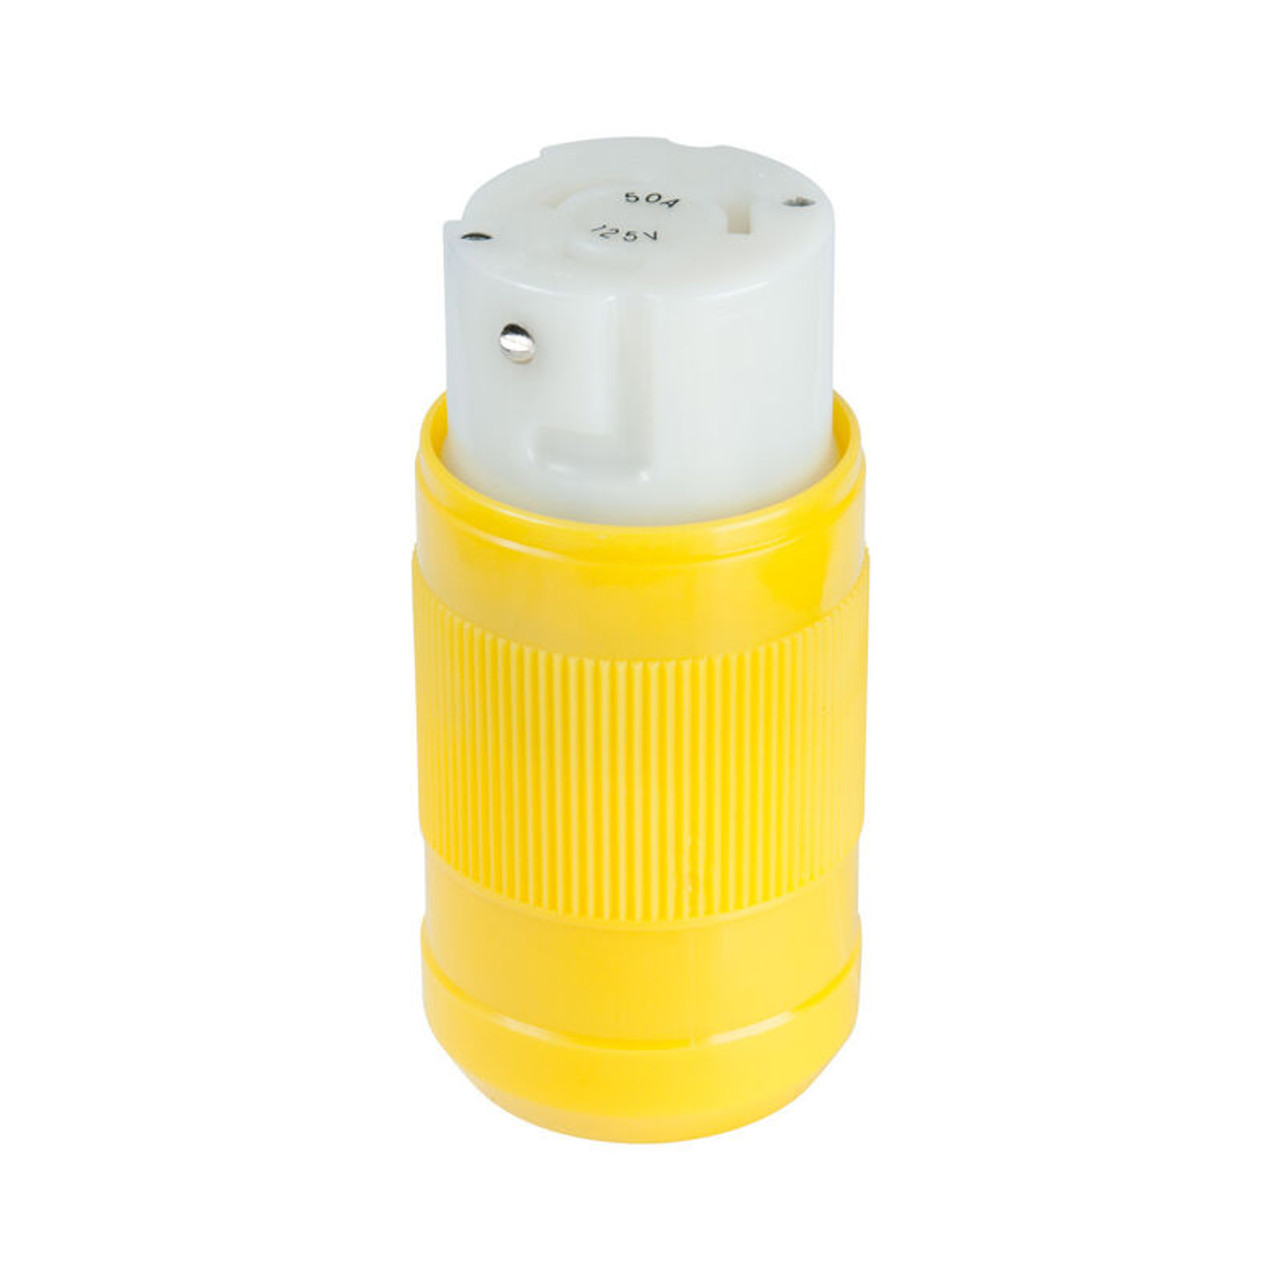 MARINCO Female Connector, 50A 125V, Yellow PN 6360CRN MALAYSIA INDONESIA VIETNAM SINGAPORE THAILAND Philippines